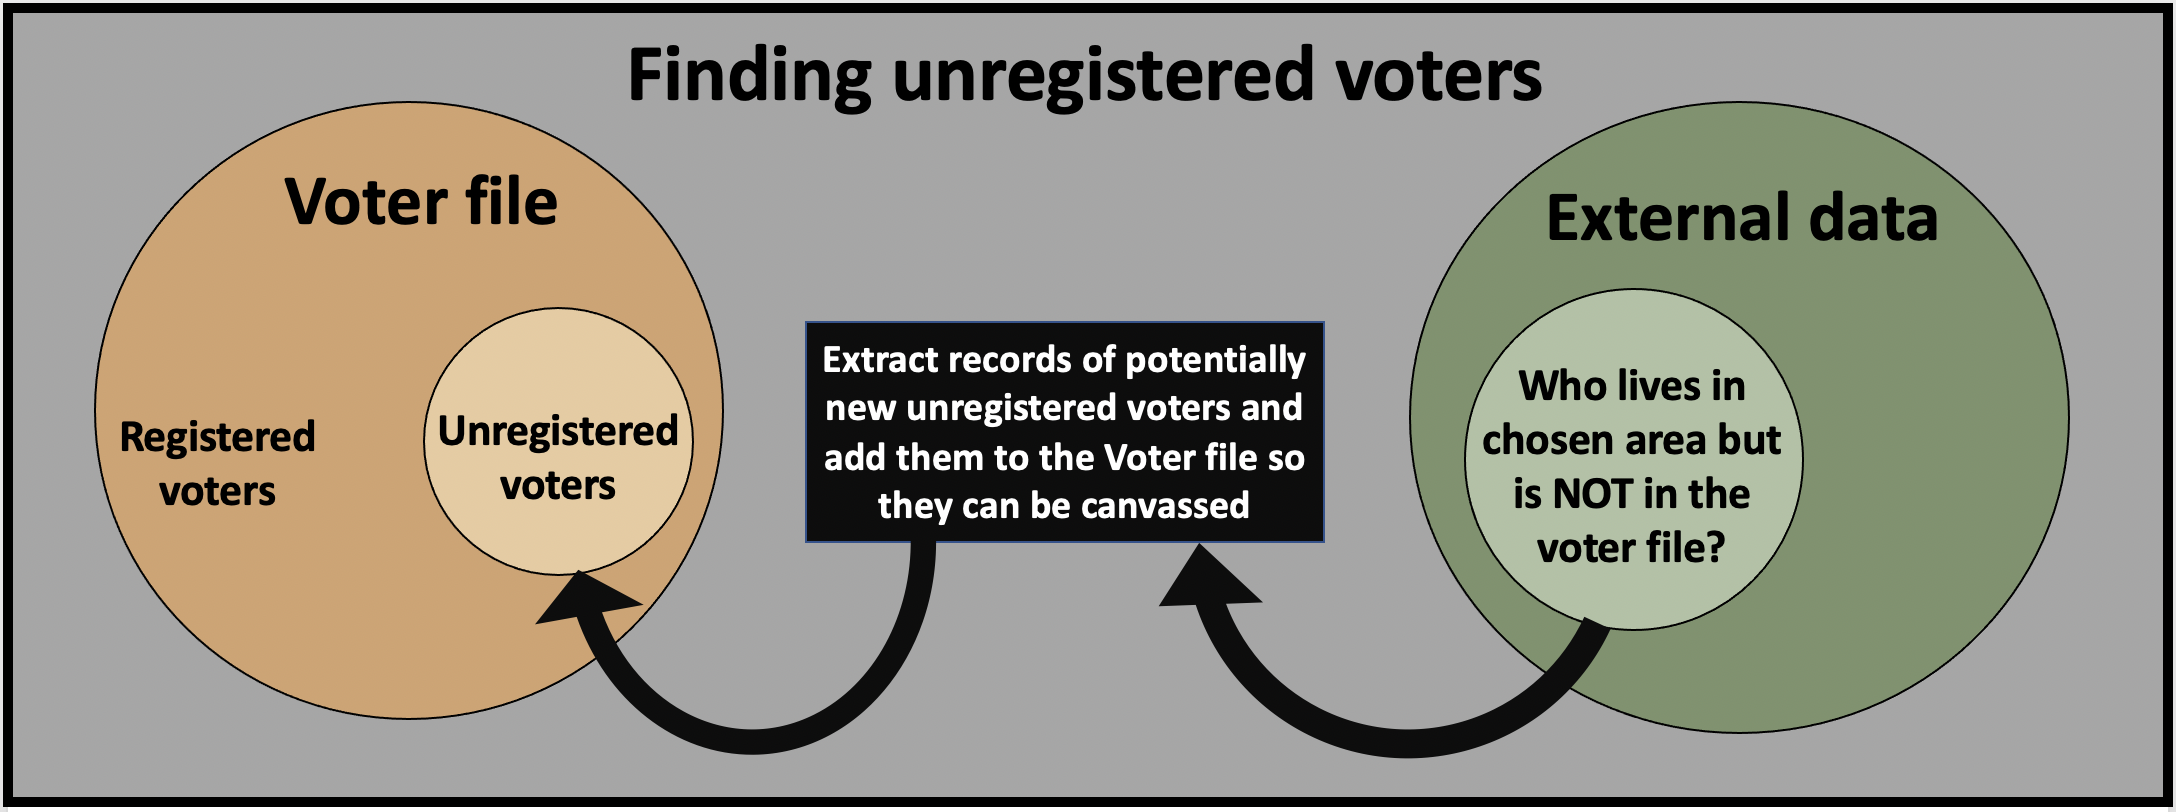 Use external data sources to find unregistered voter who may not be in the voter file.